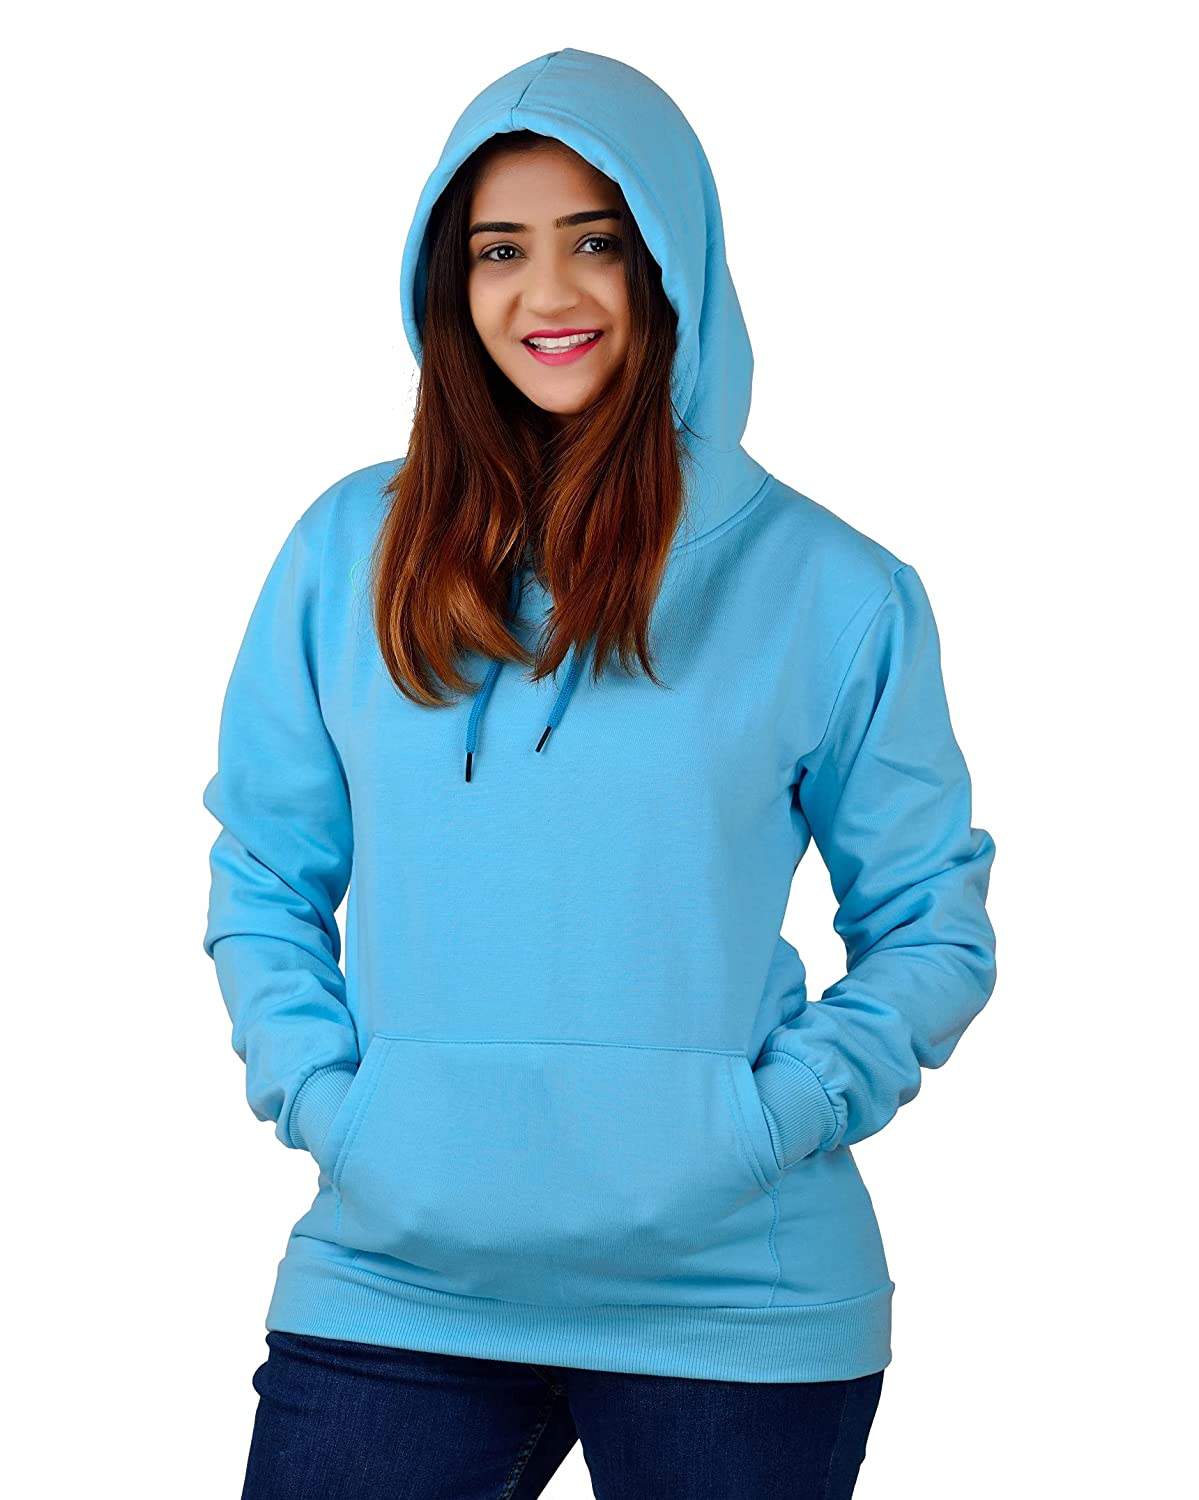 SkyBlue Hoodie For Women